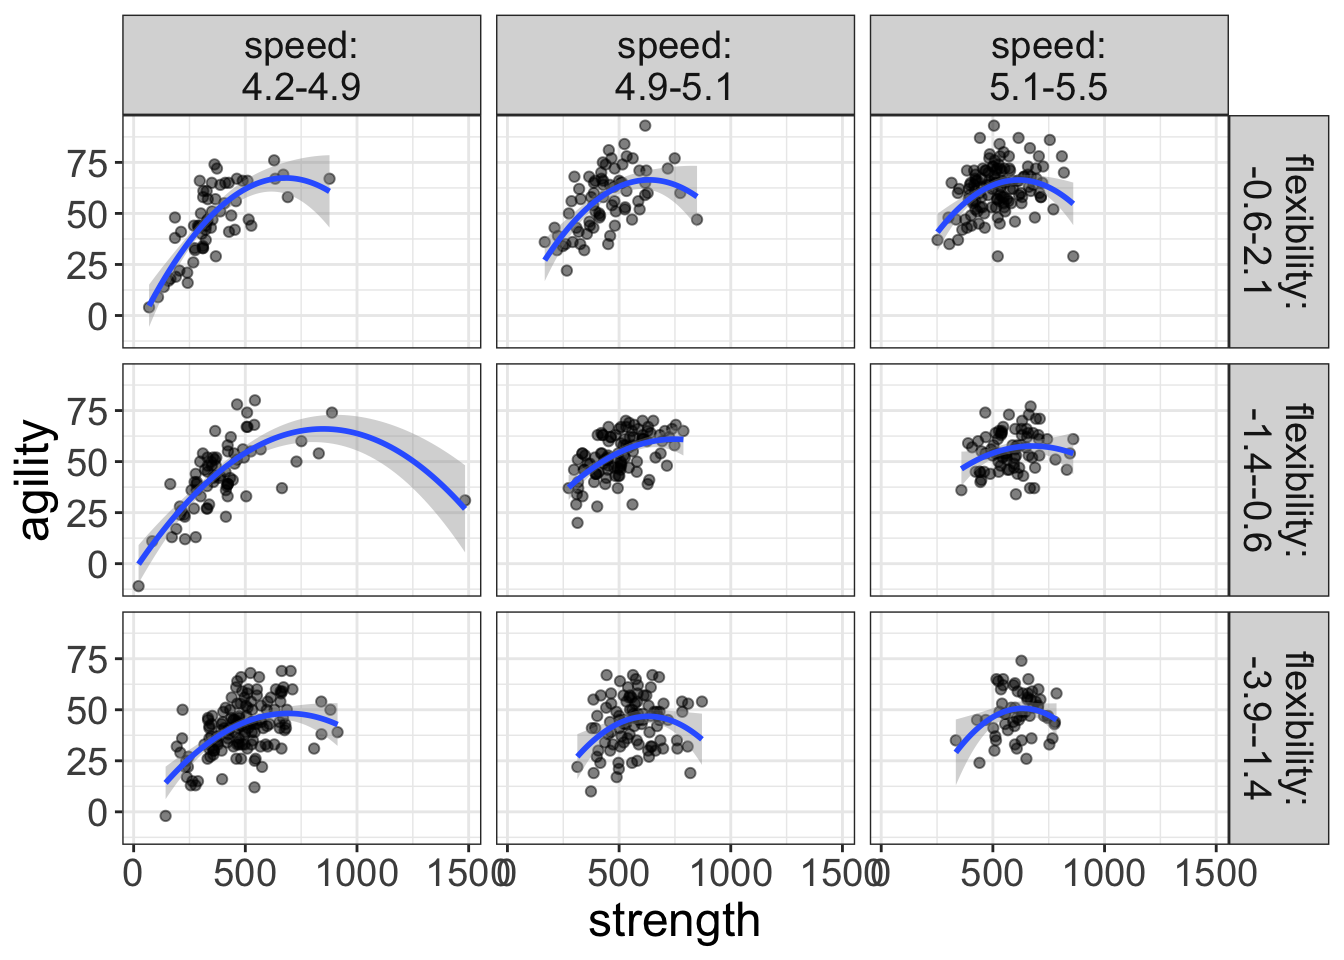 Plot of the relationship between strength and agility for various levels of speed and flexibility. The blue lines represent fits from a quadratic regression.